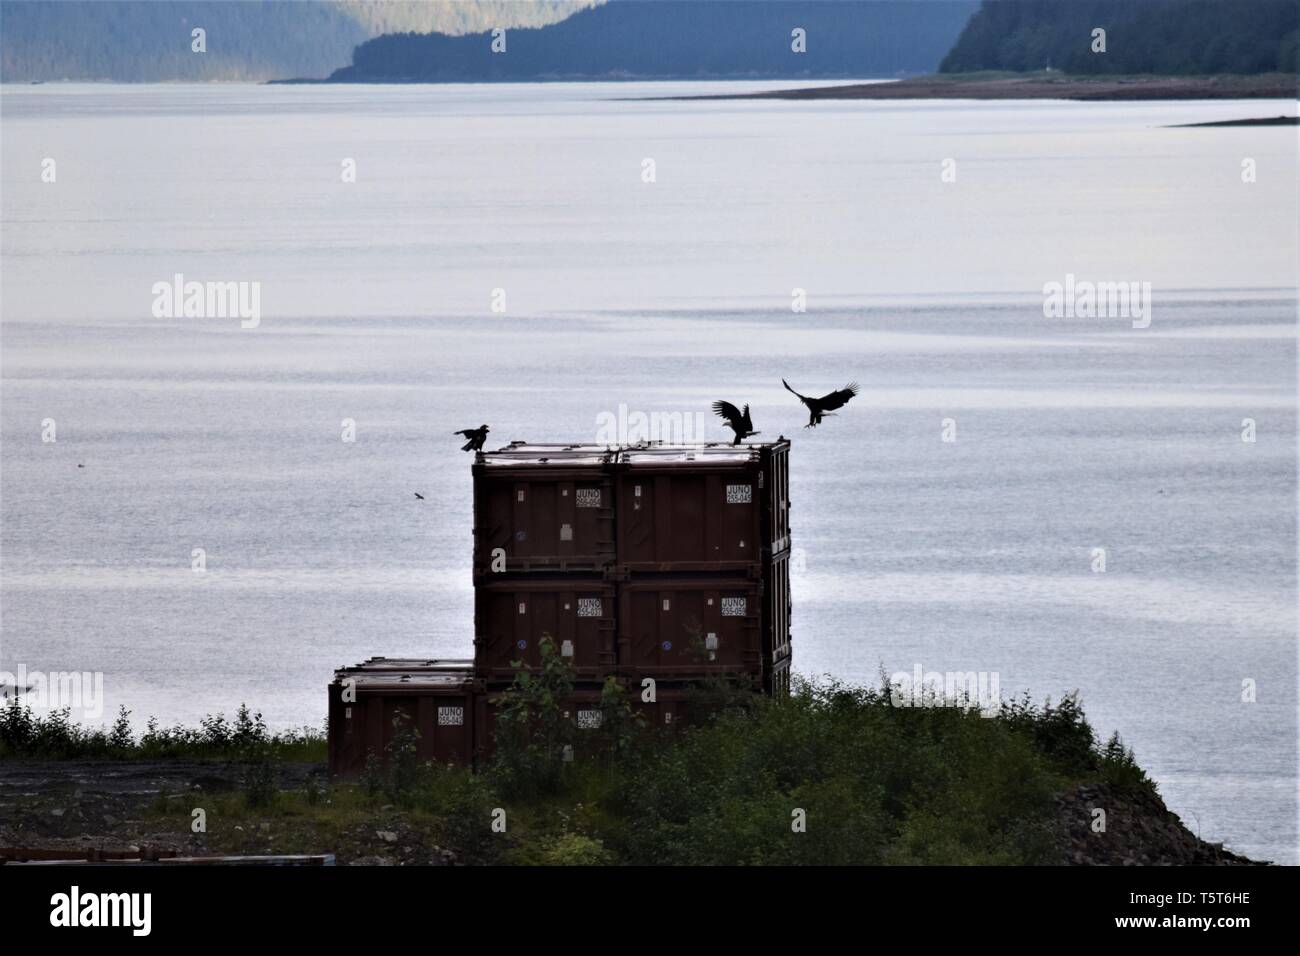 Bald eagles land on a shipping container at an Alaskan port Stock Photo